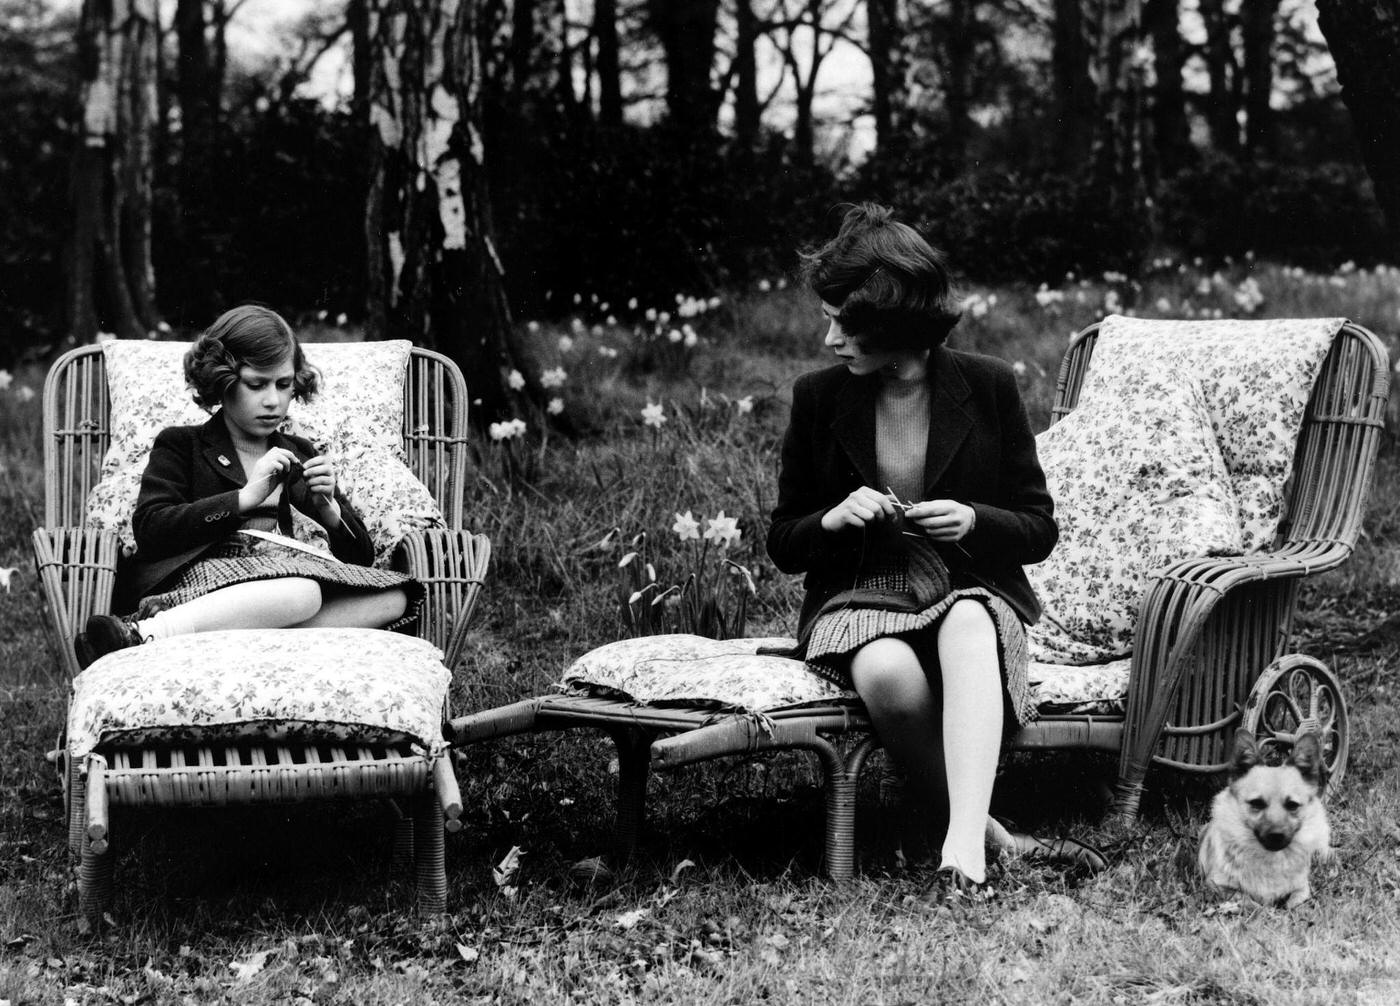 Princess Elizabeth and Princess Margaret practicing their knitting skills in the grounds of the Royal Lodge in Windsor during World War II, Windsor, England, 1940.